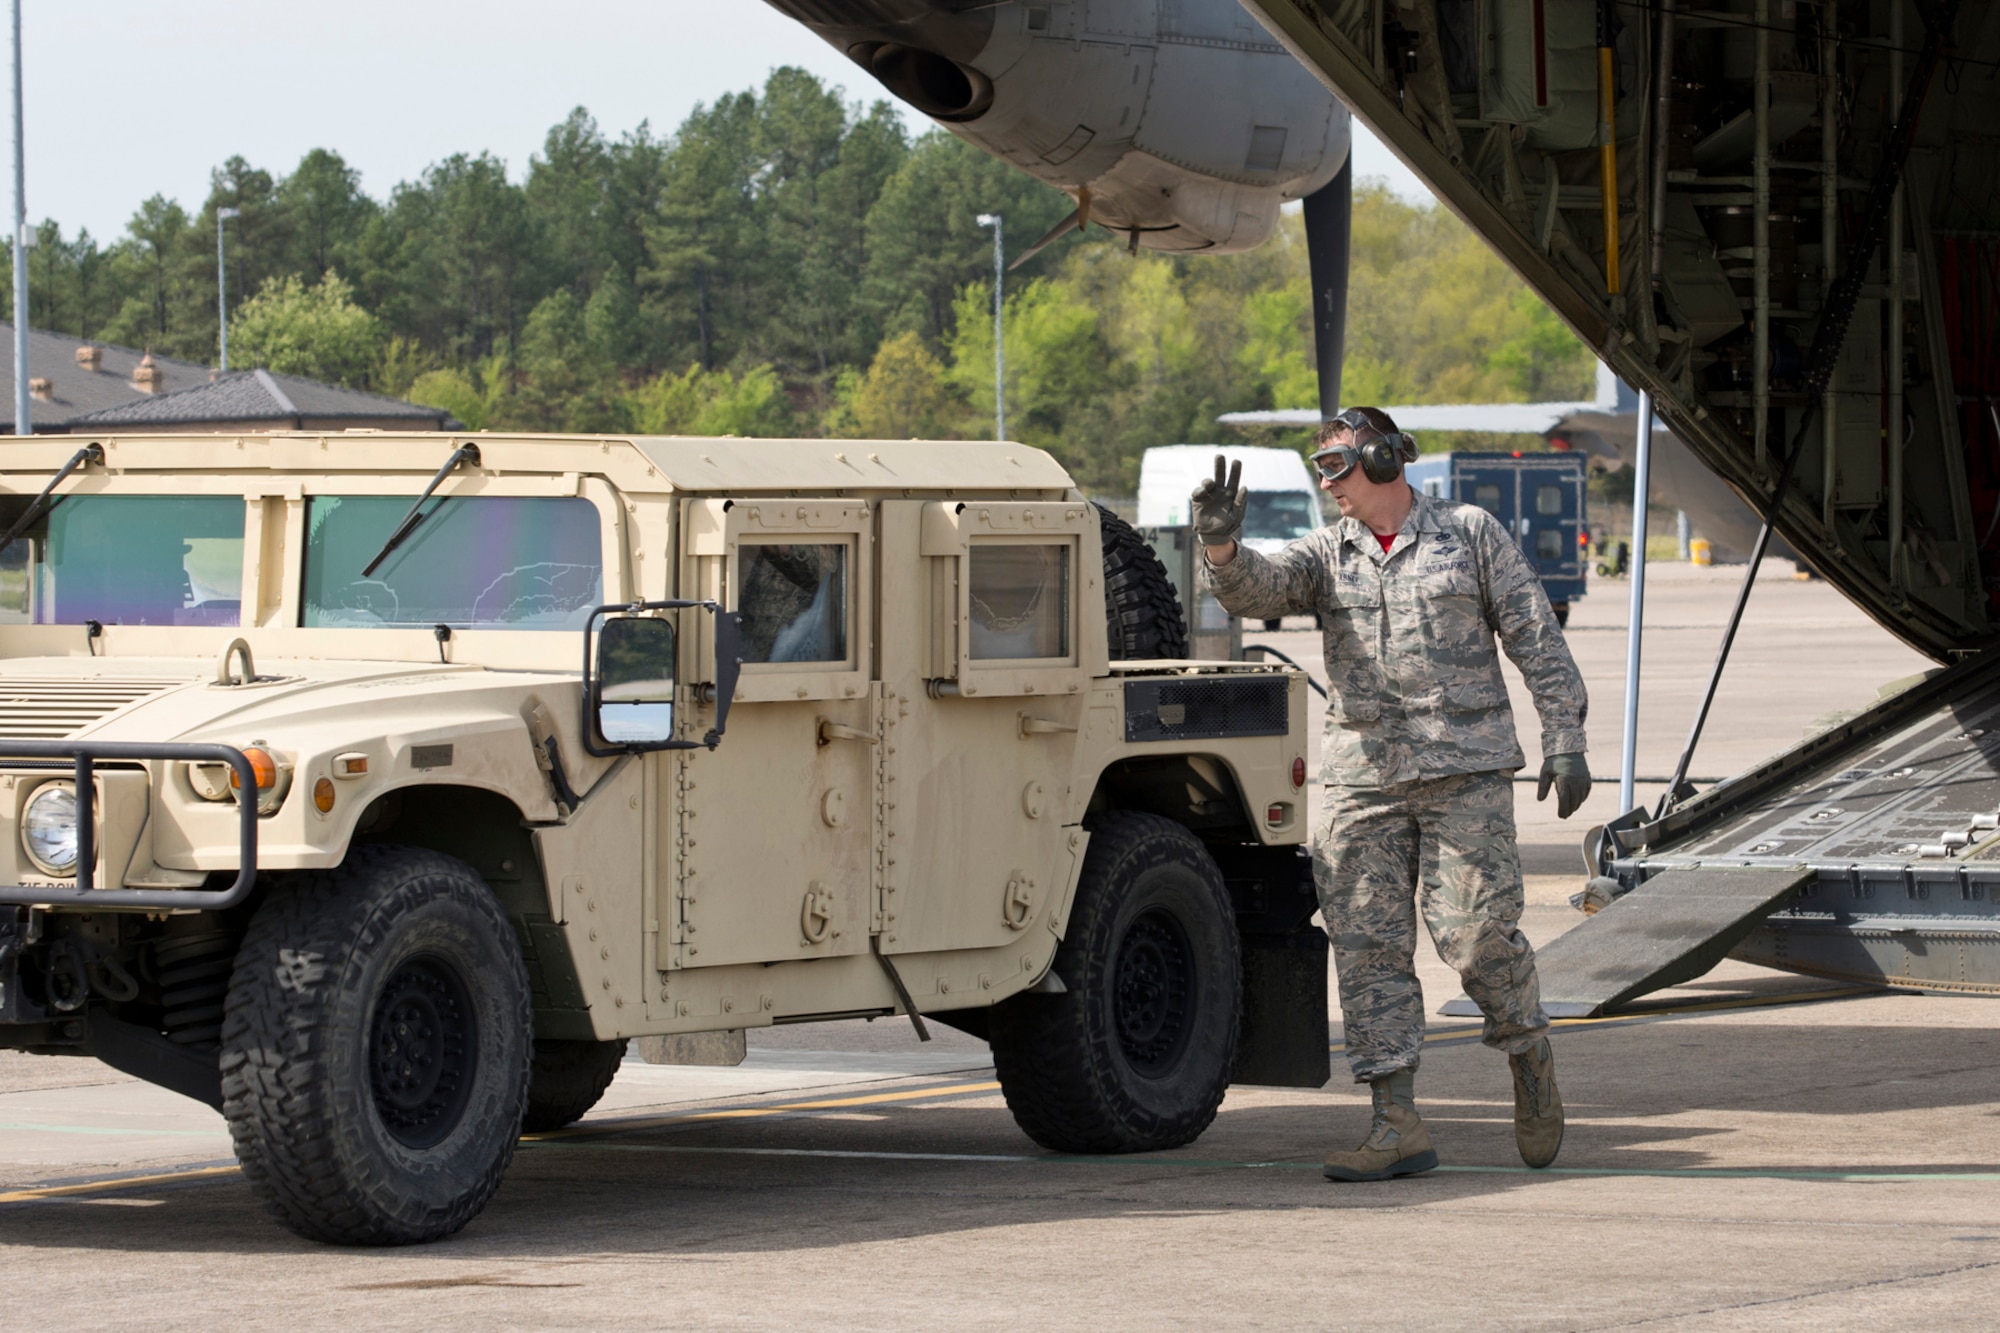 U.S. Air Force Reserve Master Sgt. Morgan Abner, air transportation craftsman, 96th Aerial Port Squadron, directs the driver of a Humvee during a training exercise April 2, 2017, at Little Rock Air Force Base, Ark. Abner is one member of a team preparing to compete in the 2017 Port Dawg Challenge for air mobility professionals, which the 96 APS won in 2012, at Dobbins Air Reserve Base, Ga.,. (U.S. Air Force photo by Master Sgt. Jeff Walston/Released)